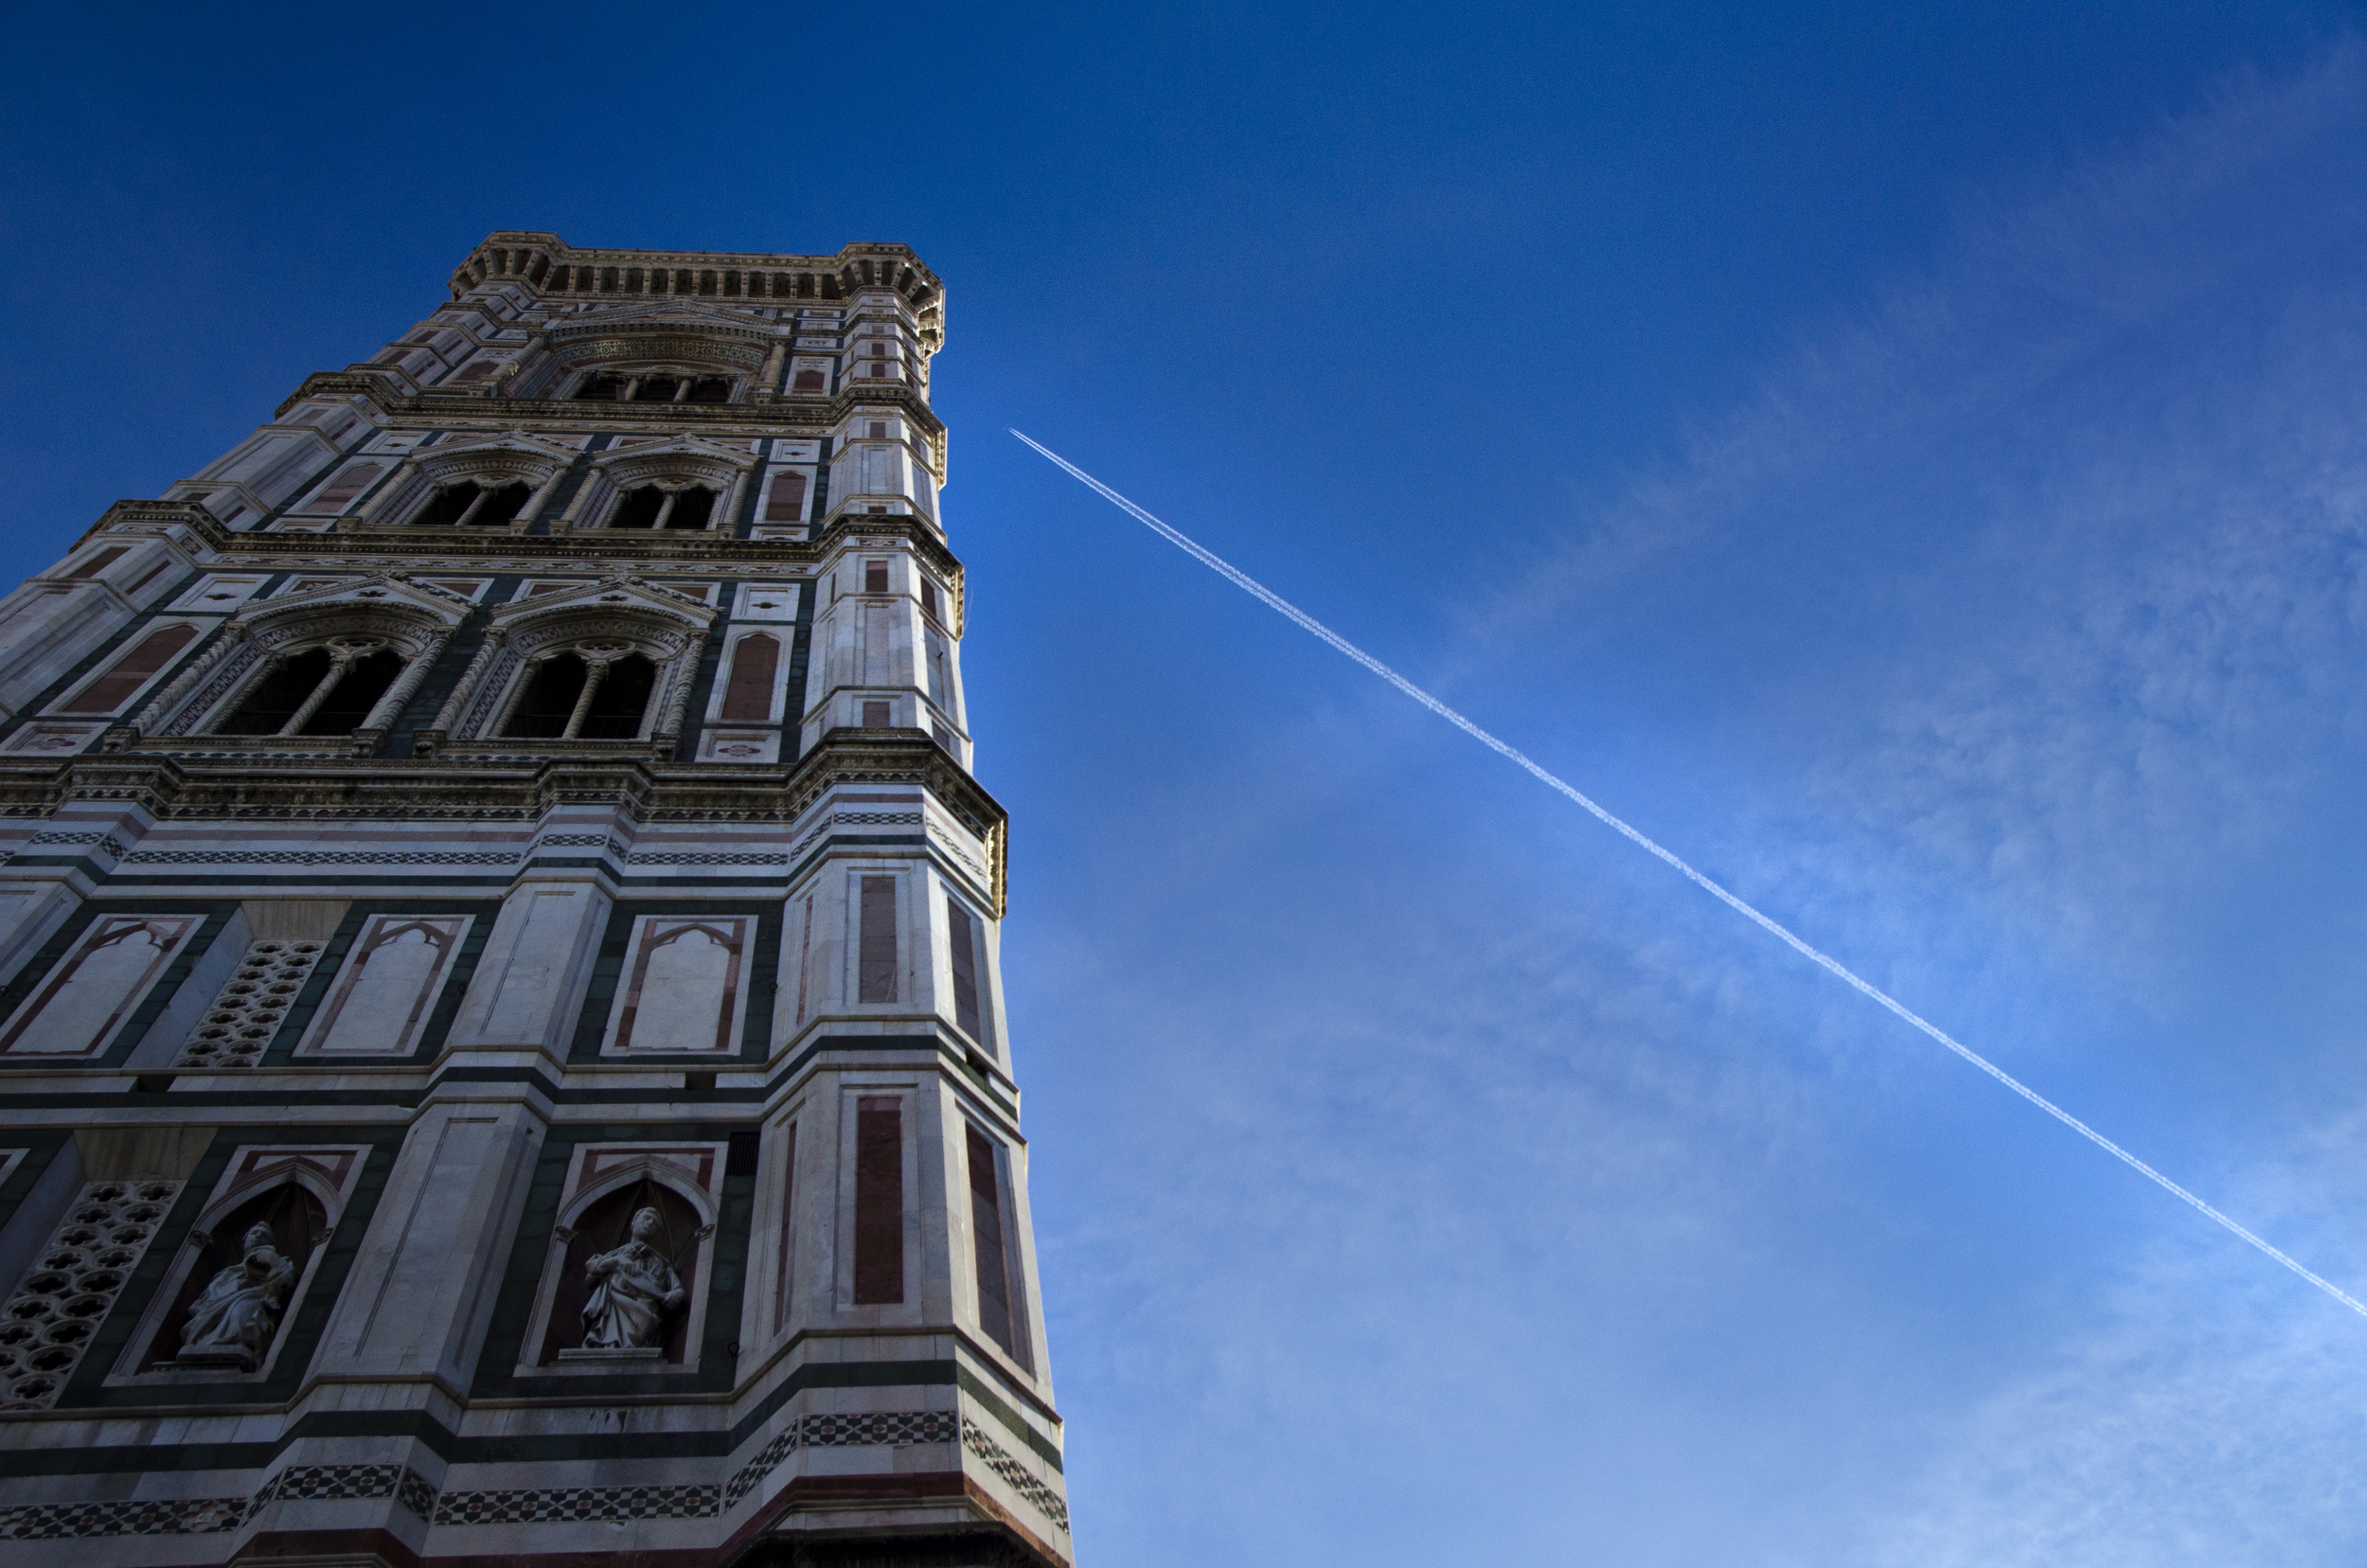  The clang of the bells of the Bell Tower of The Duomo in Florence, Italy boomed through the morning air on All Saint's Day on Sunday, November 2, 2014. 